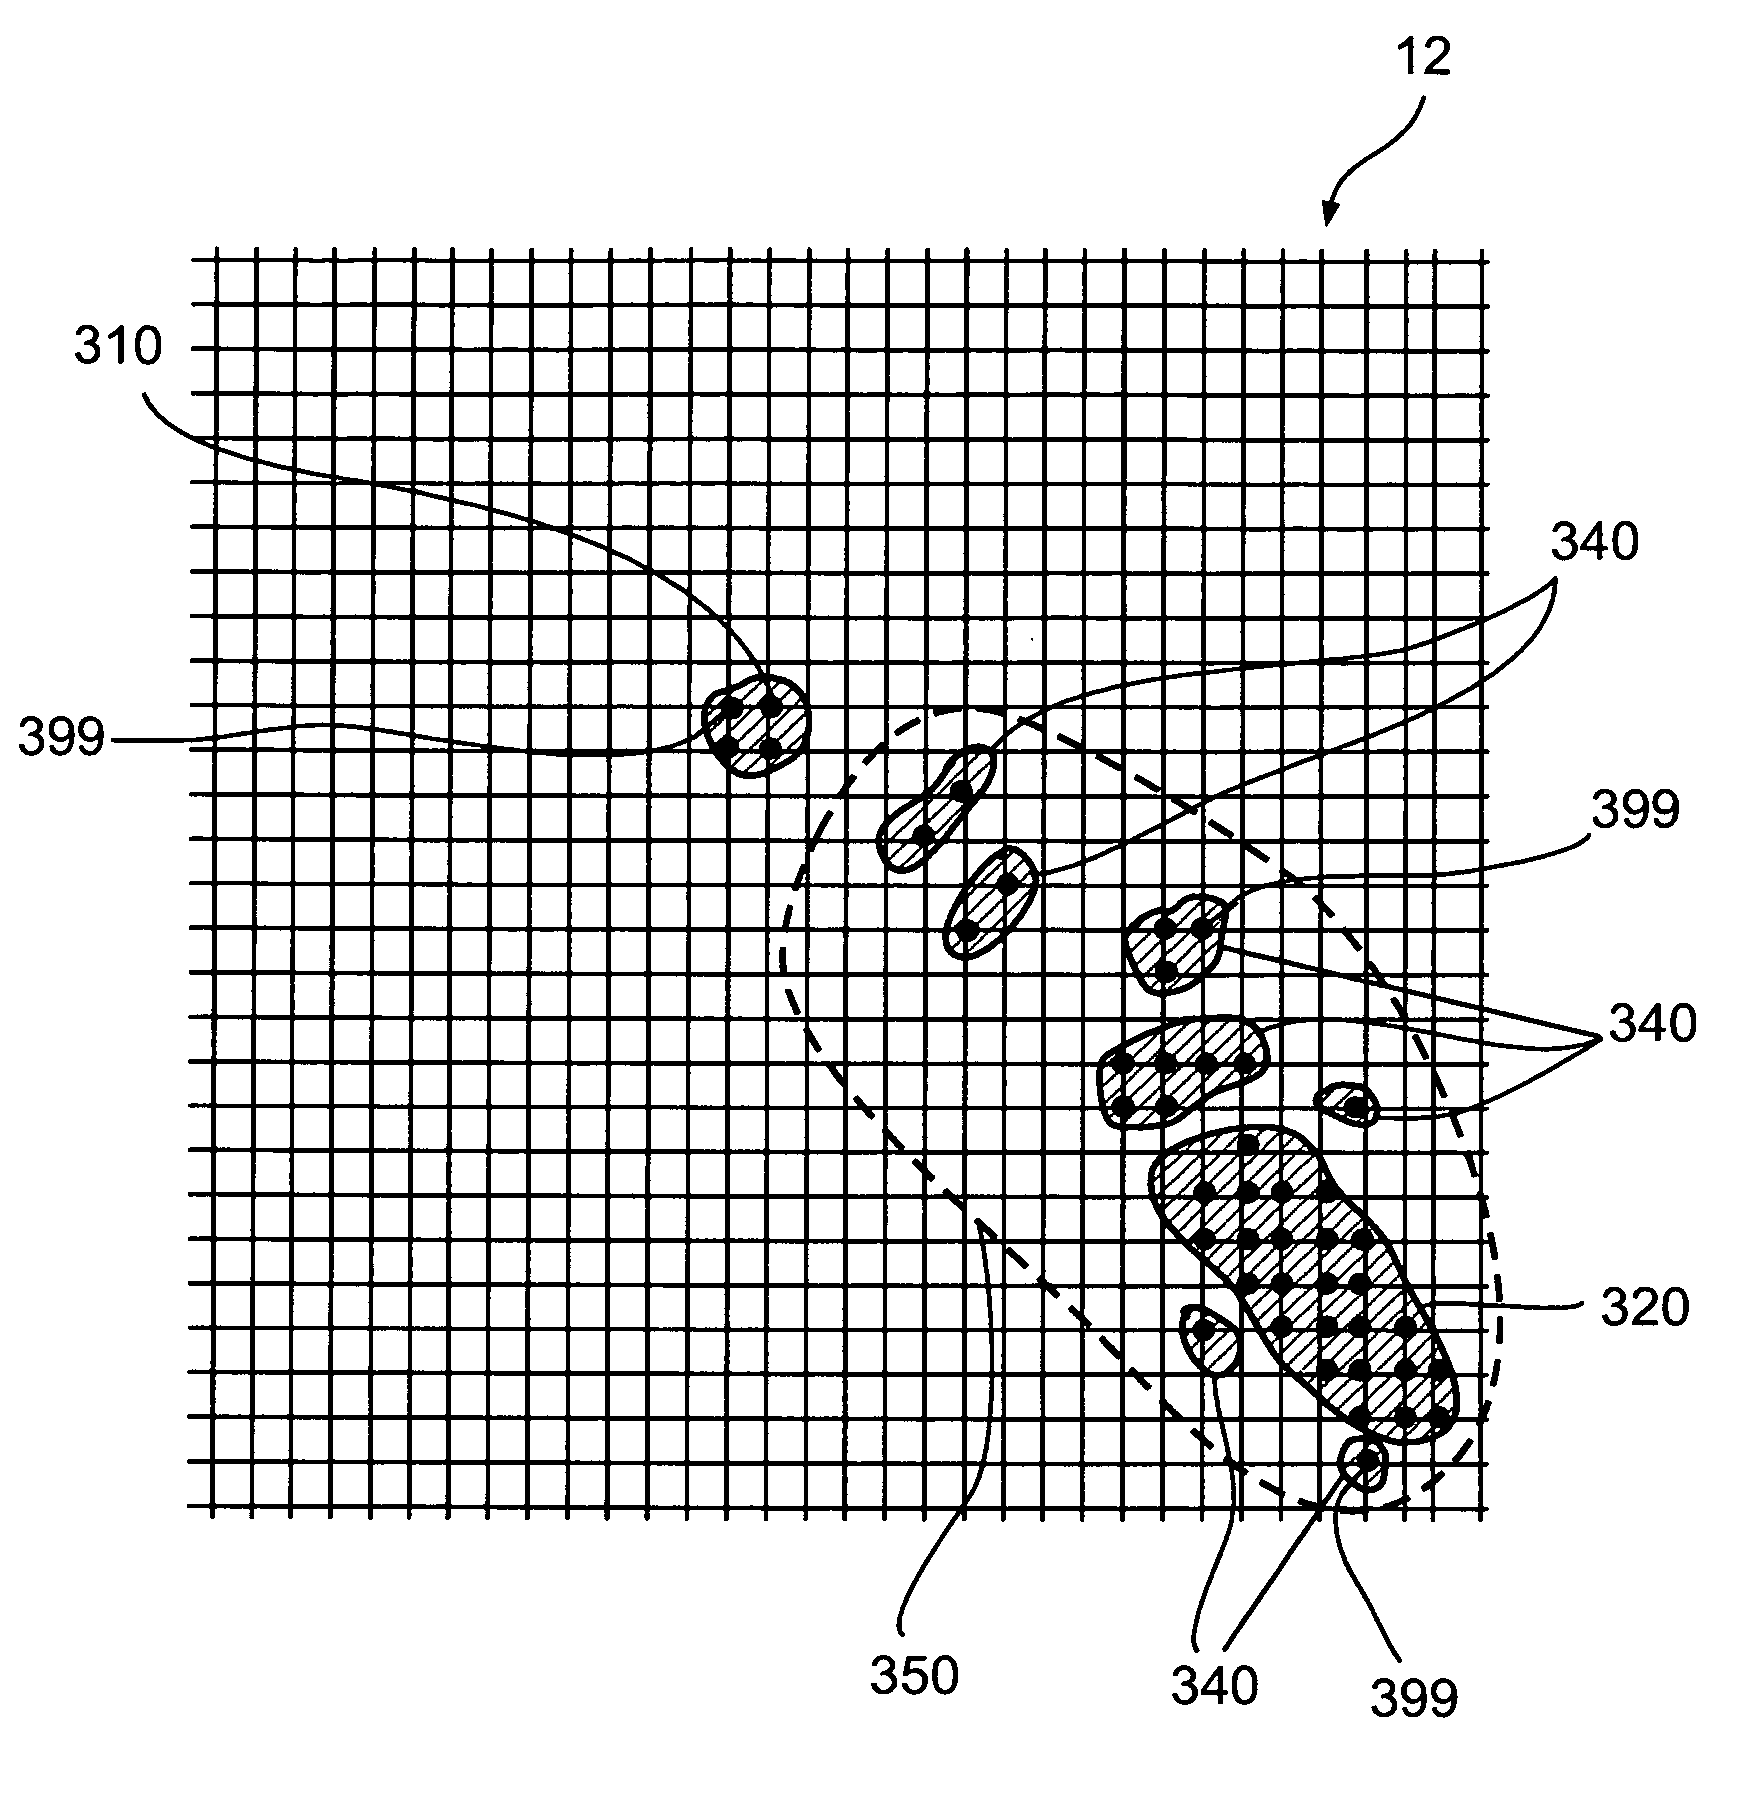 Method for palm touch identification in multi-touch digitizing systems